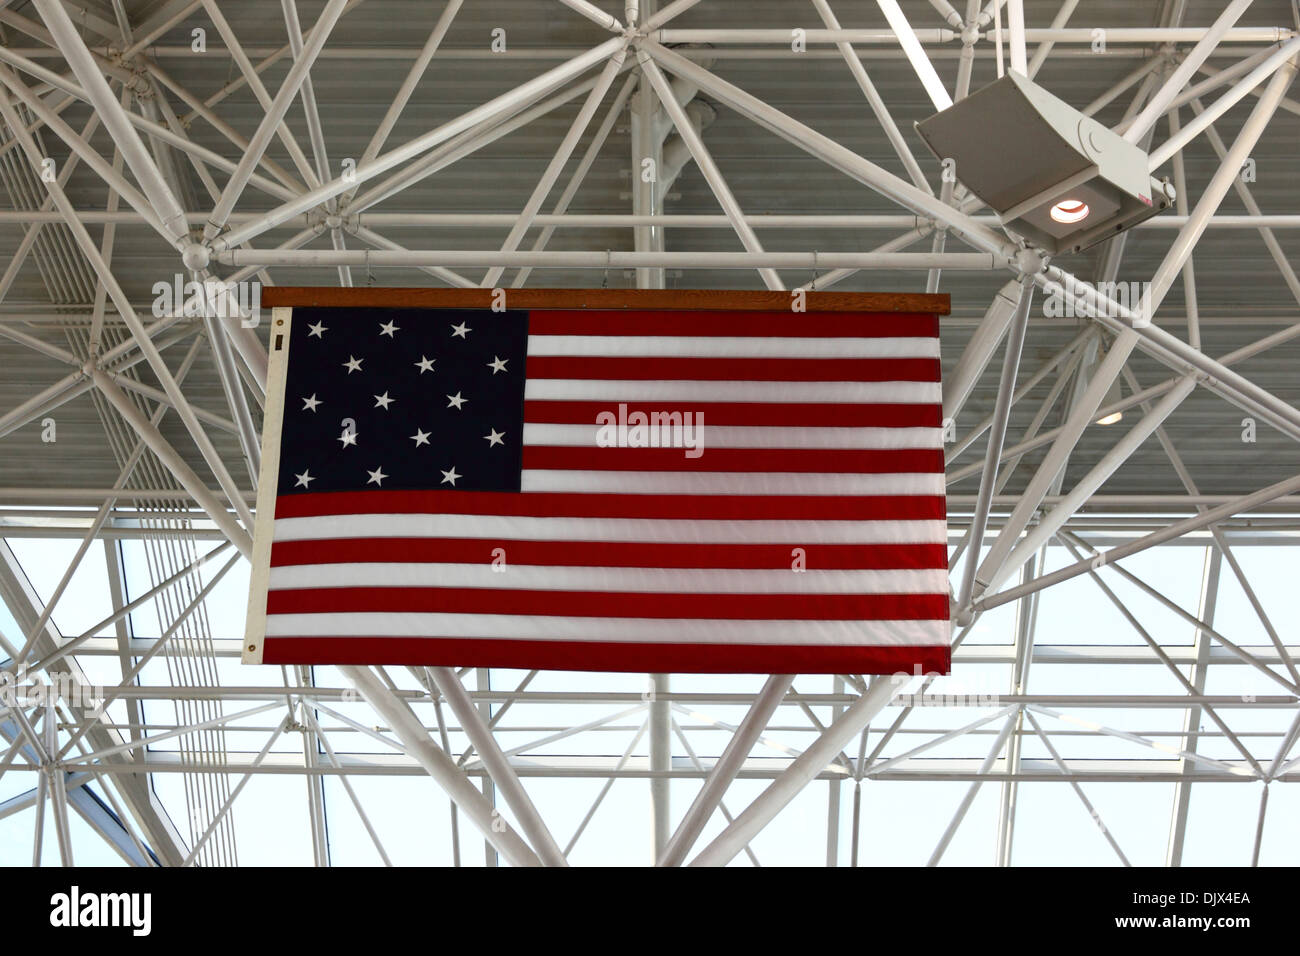 American flag with 15 stars and stripes (the Star Spangled Banner flag) hanging in Baltimore–Washington Airport, Maryland, USA Stock Photo